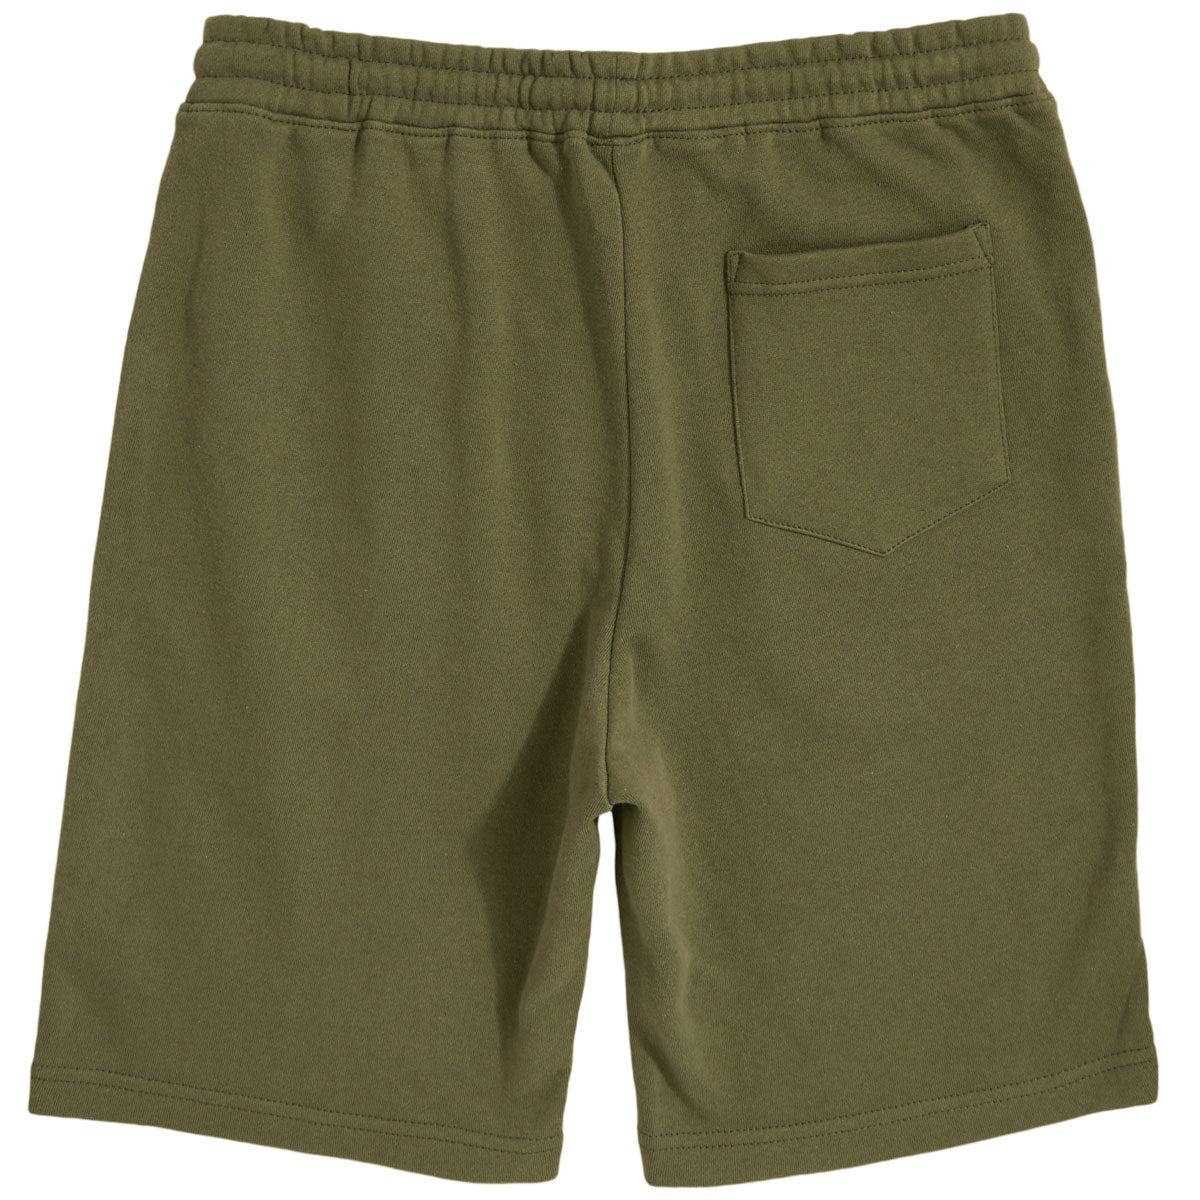 CCS Logo Rubber Patch Sweat Shorts - Army Green image 4